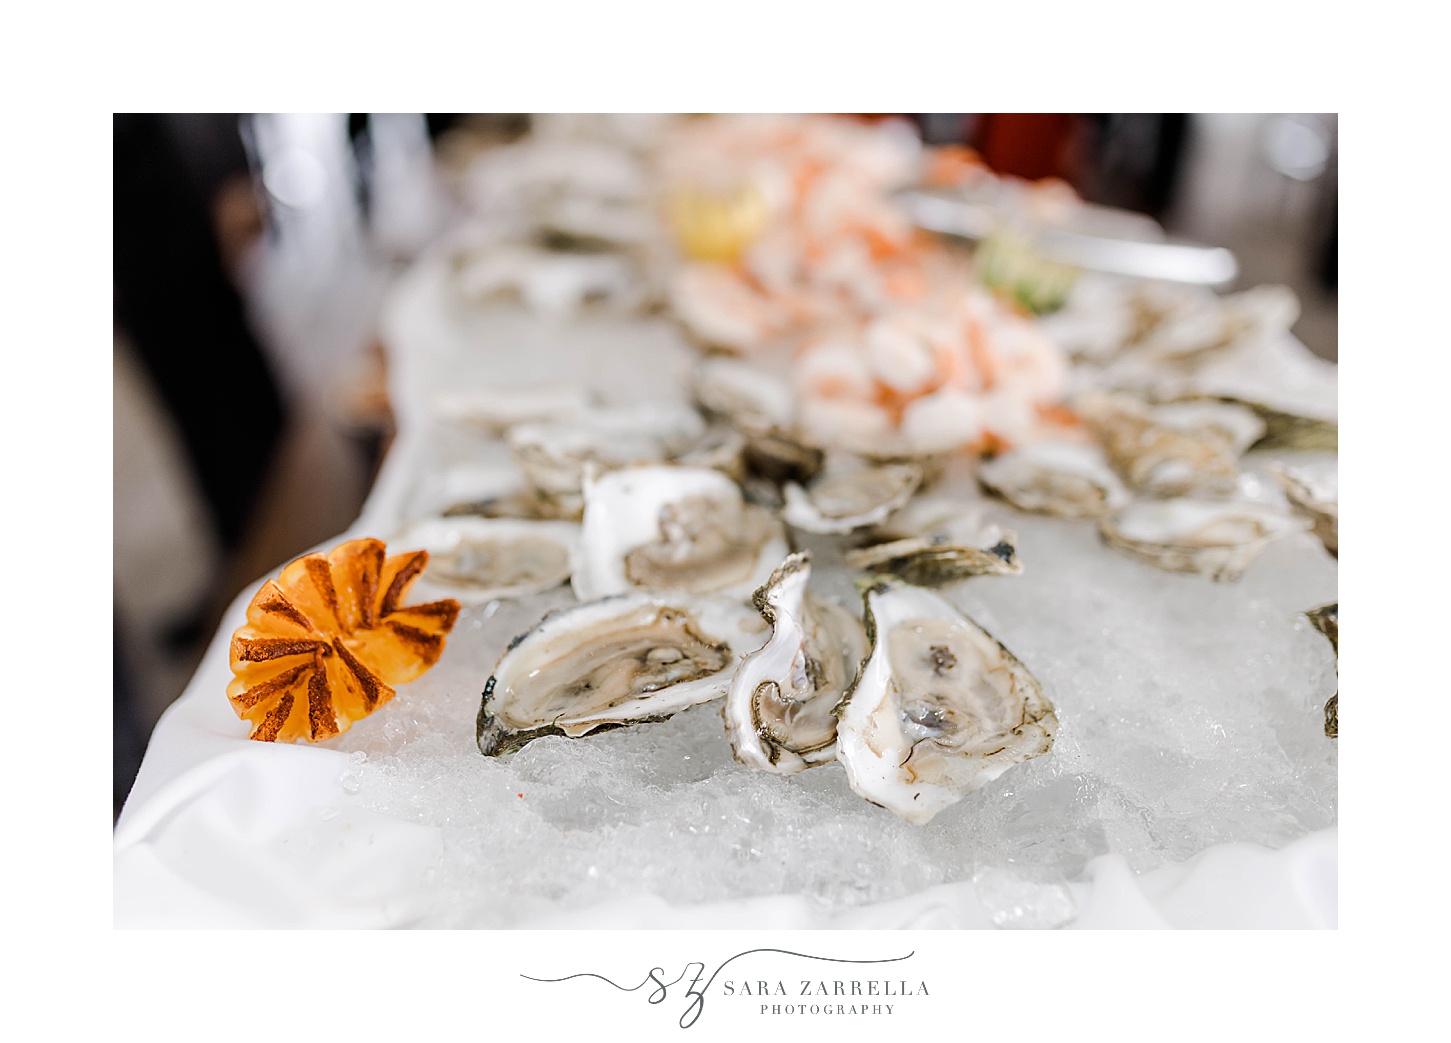 oysters lay on ice during Newport RI wedding reception 